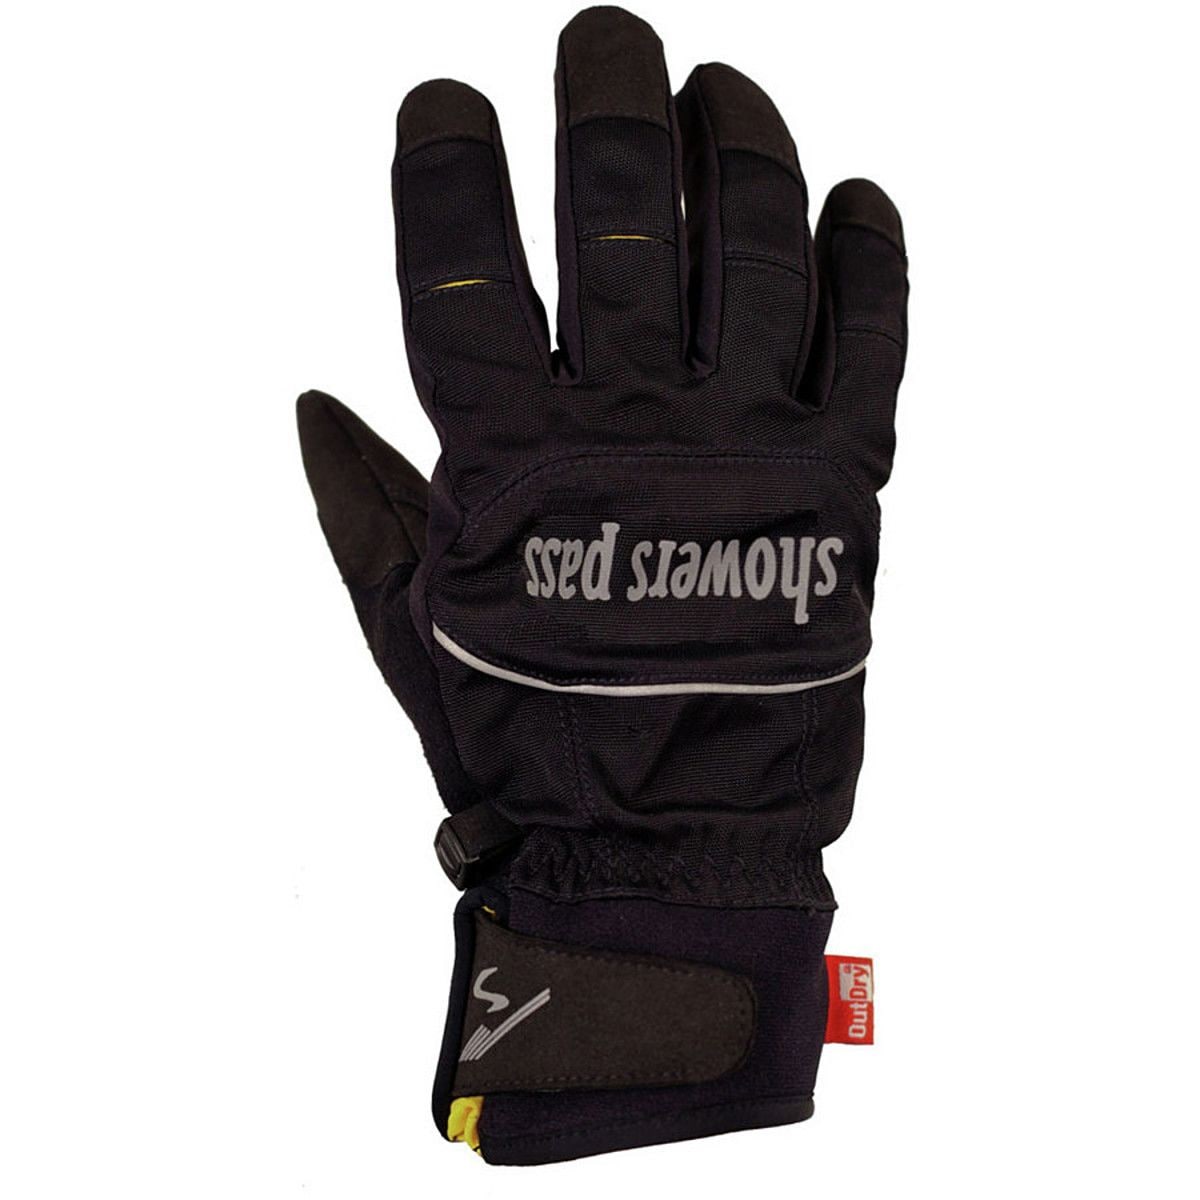 Showers Pass Crosspoint Softshell WP Gloves Men's